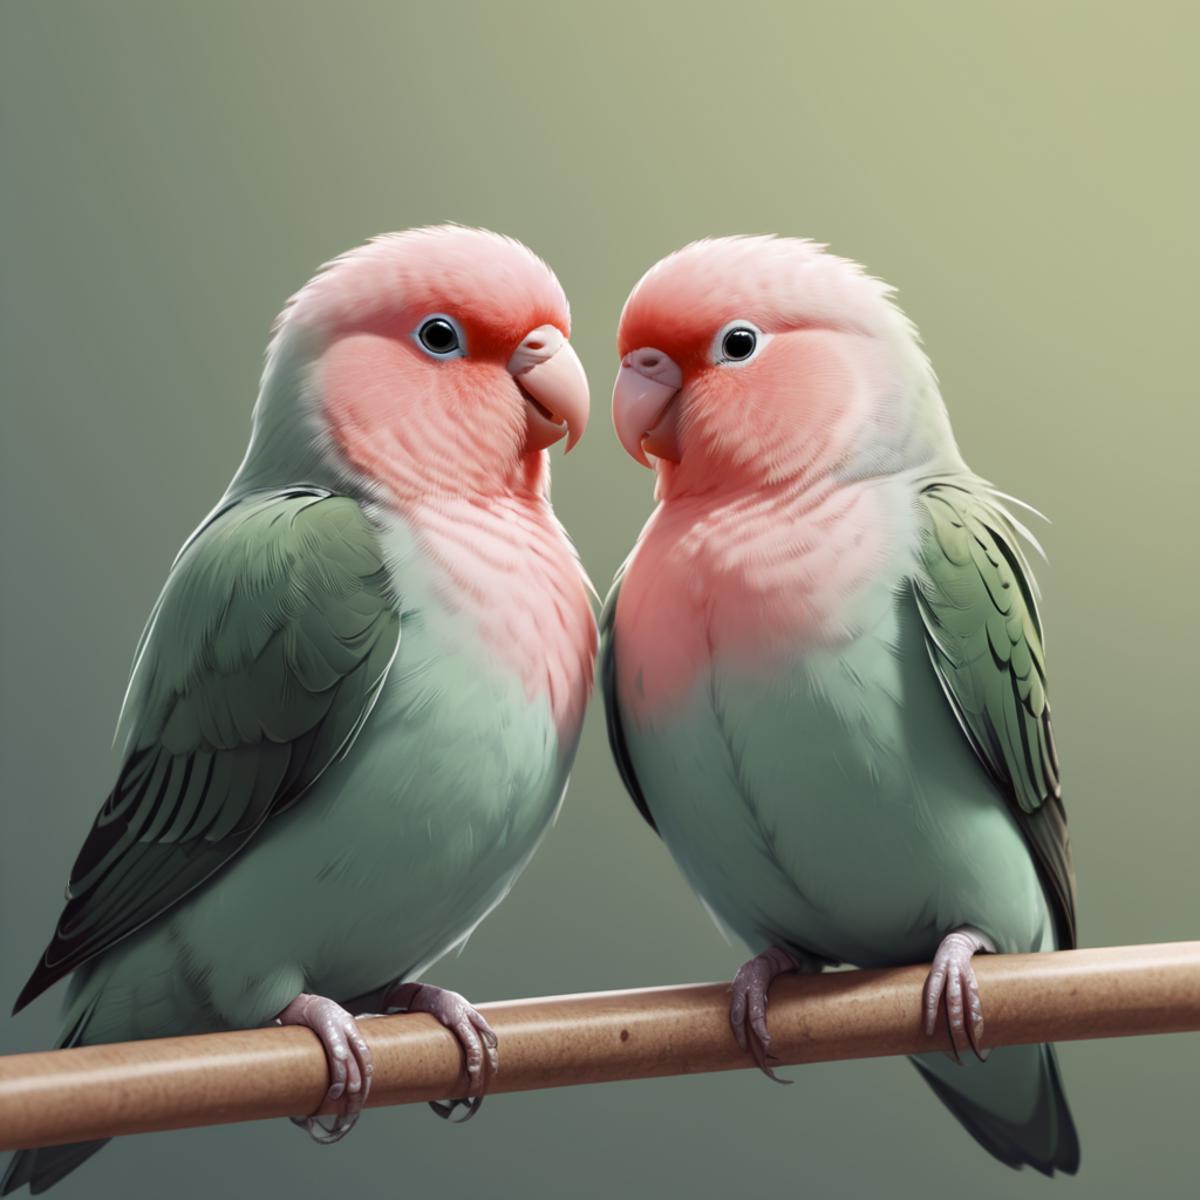 Two green and pink parrots sitting on a wooden branch.